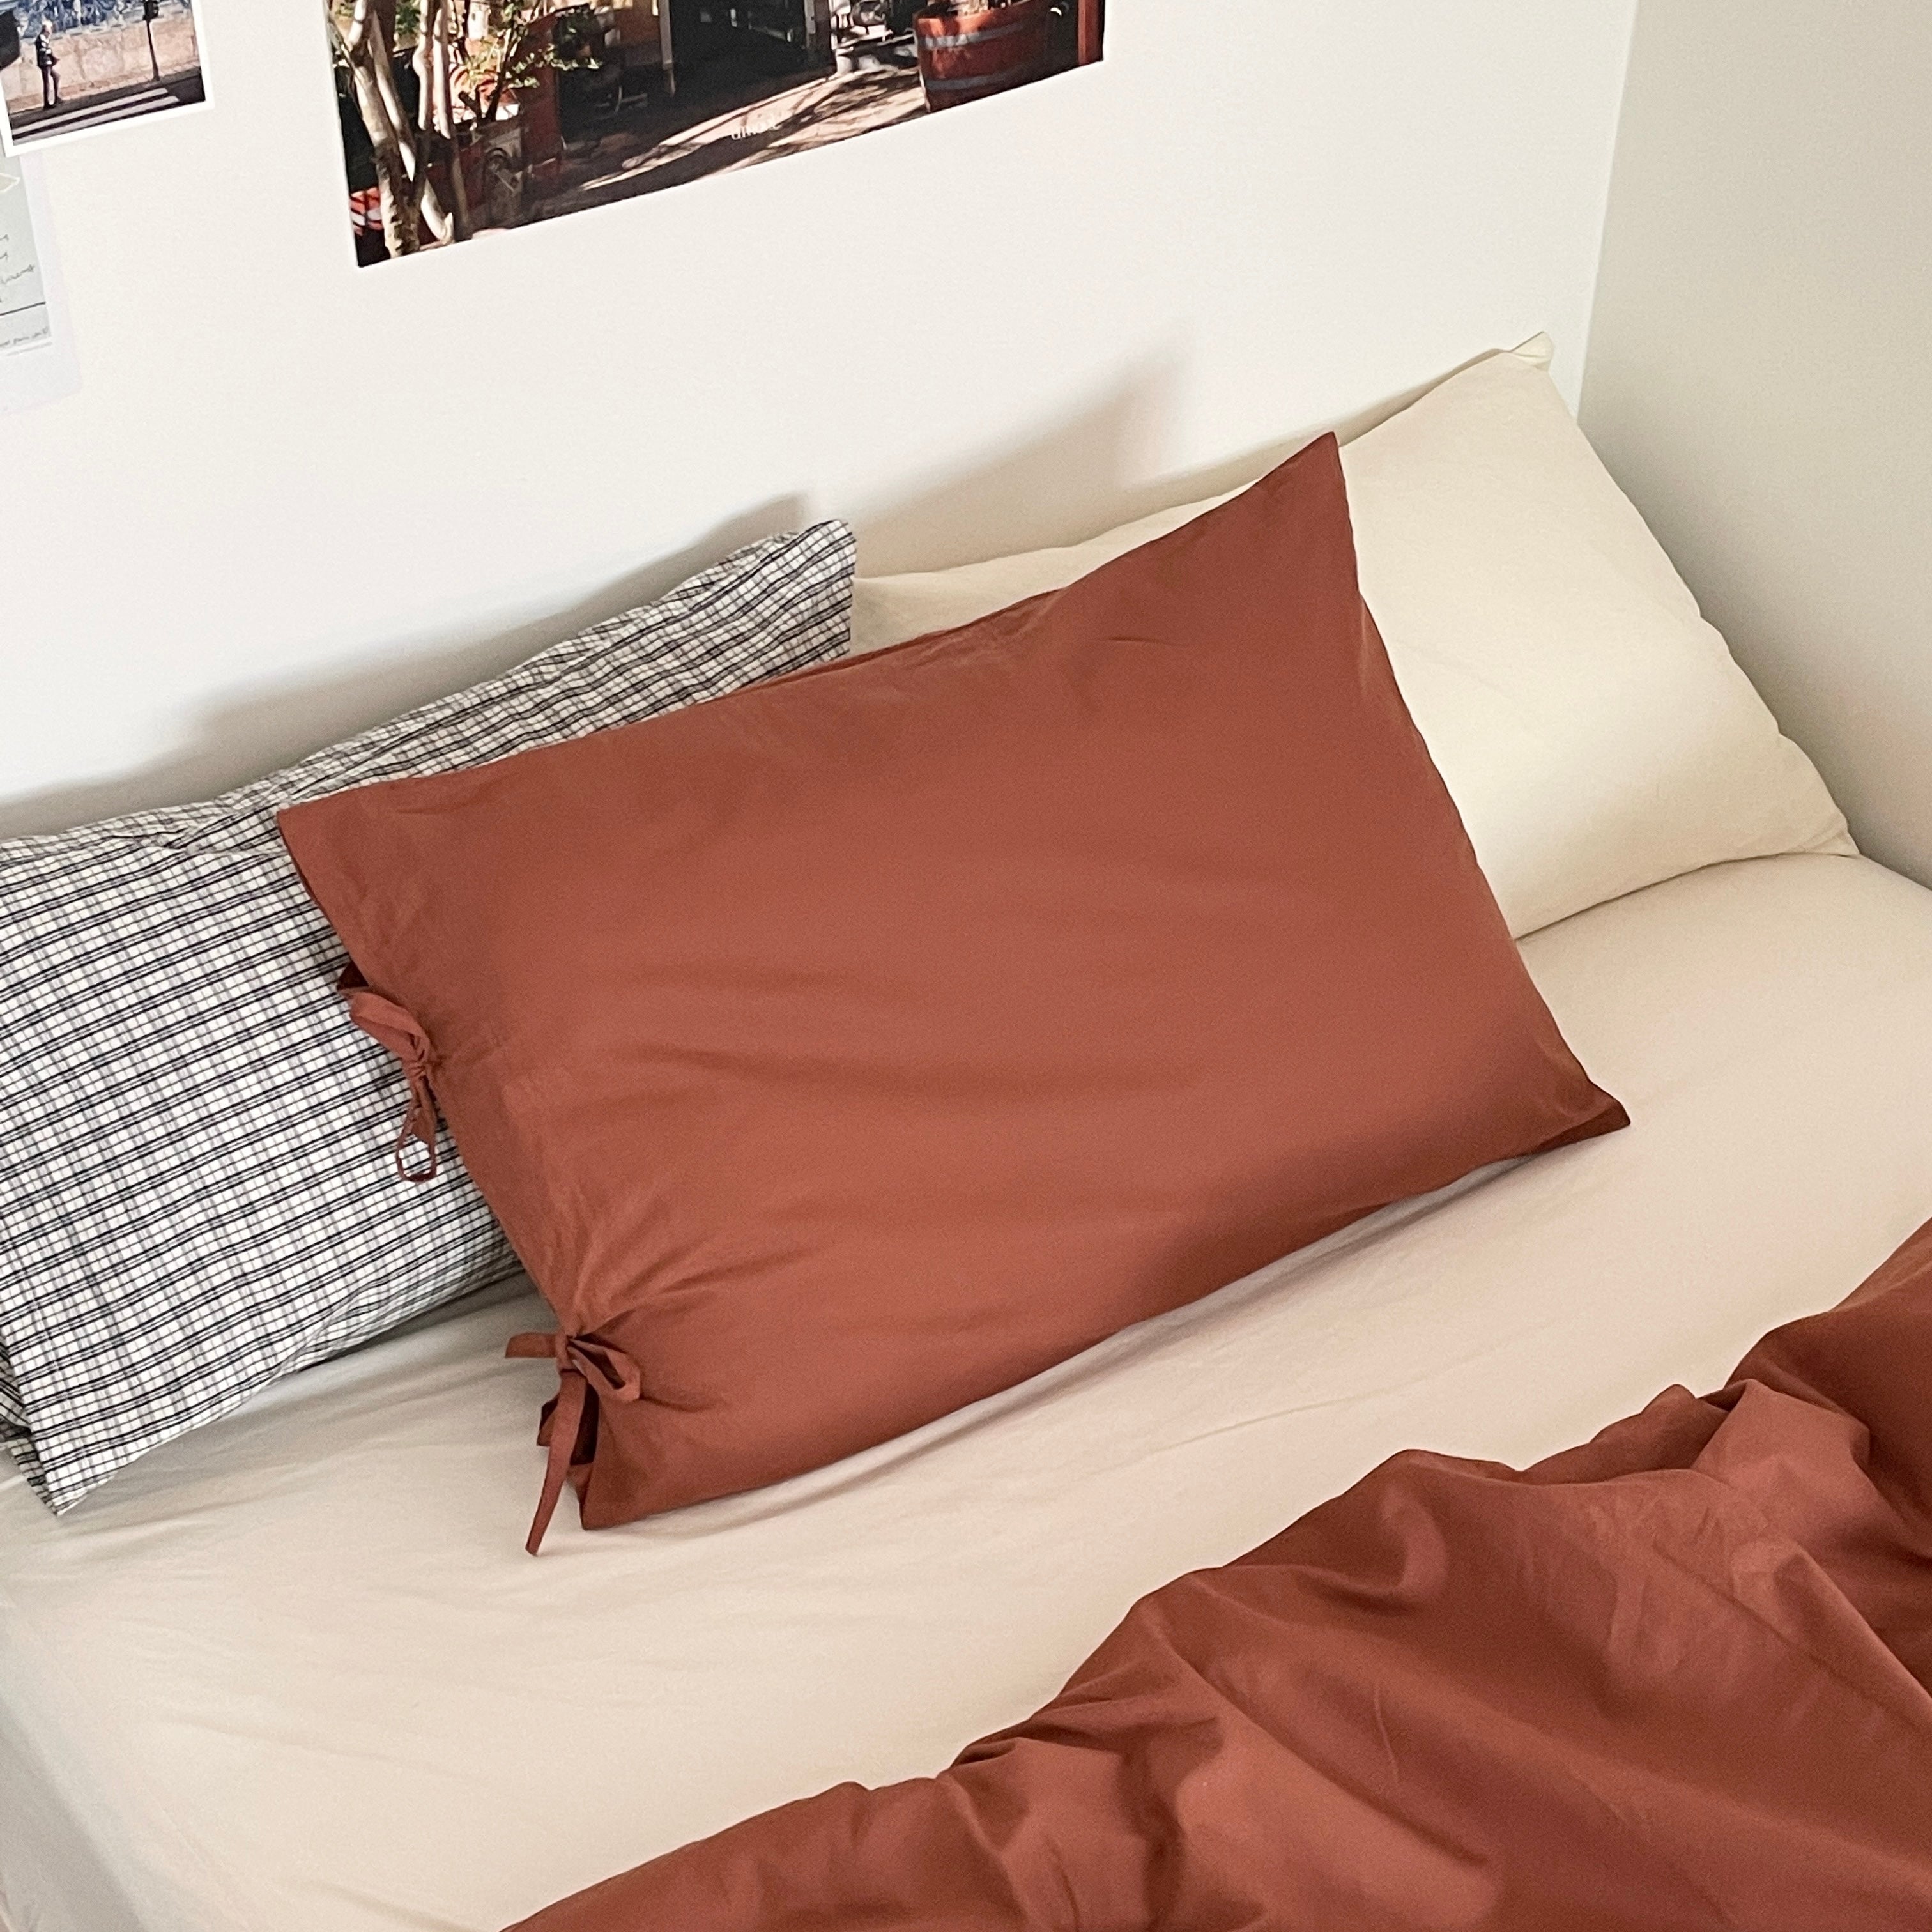 OR-2019-Little Rooms-リボン付き枕カバー｜plain pillow cover -chic color-